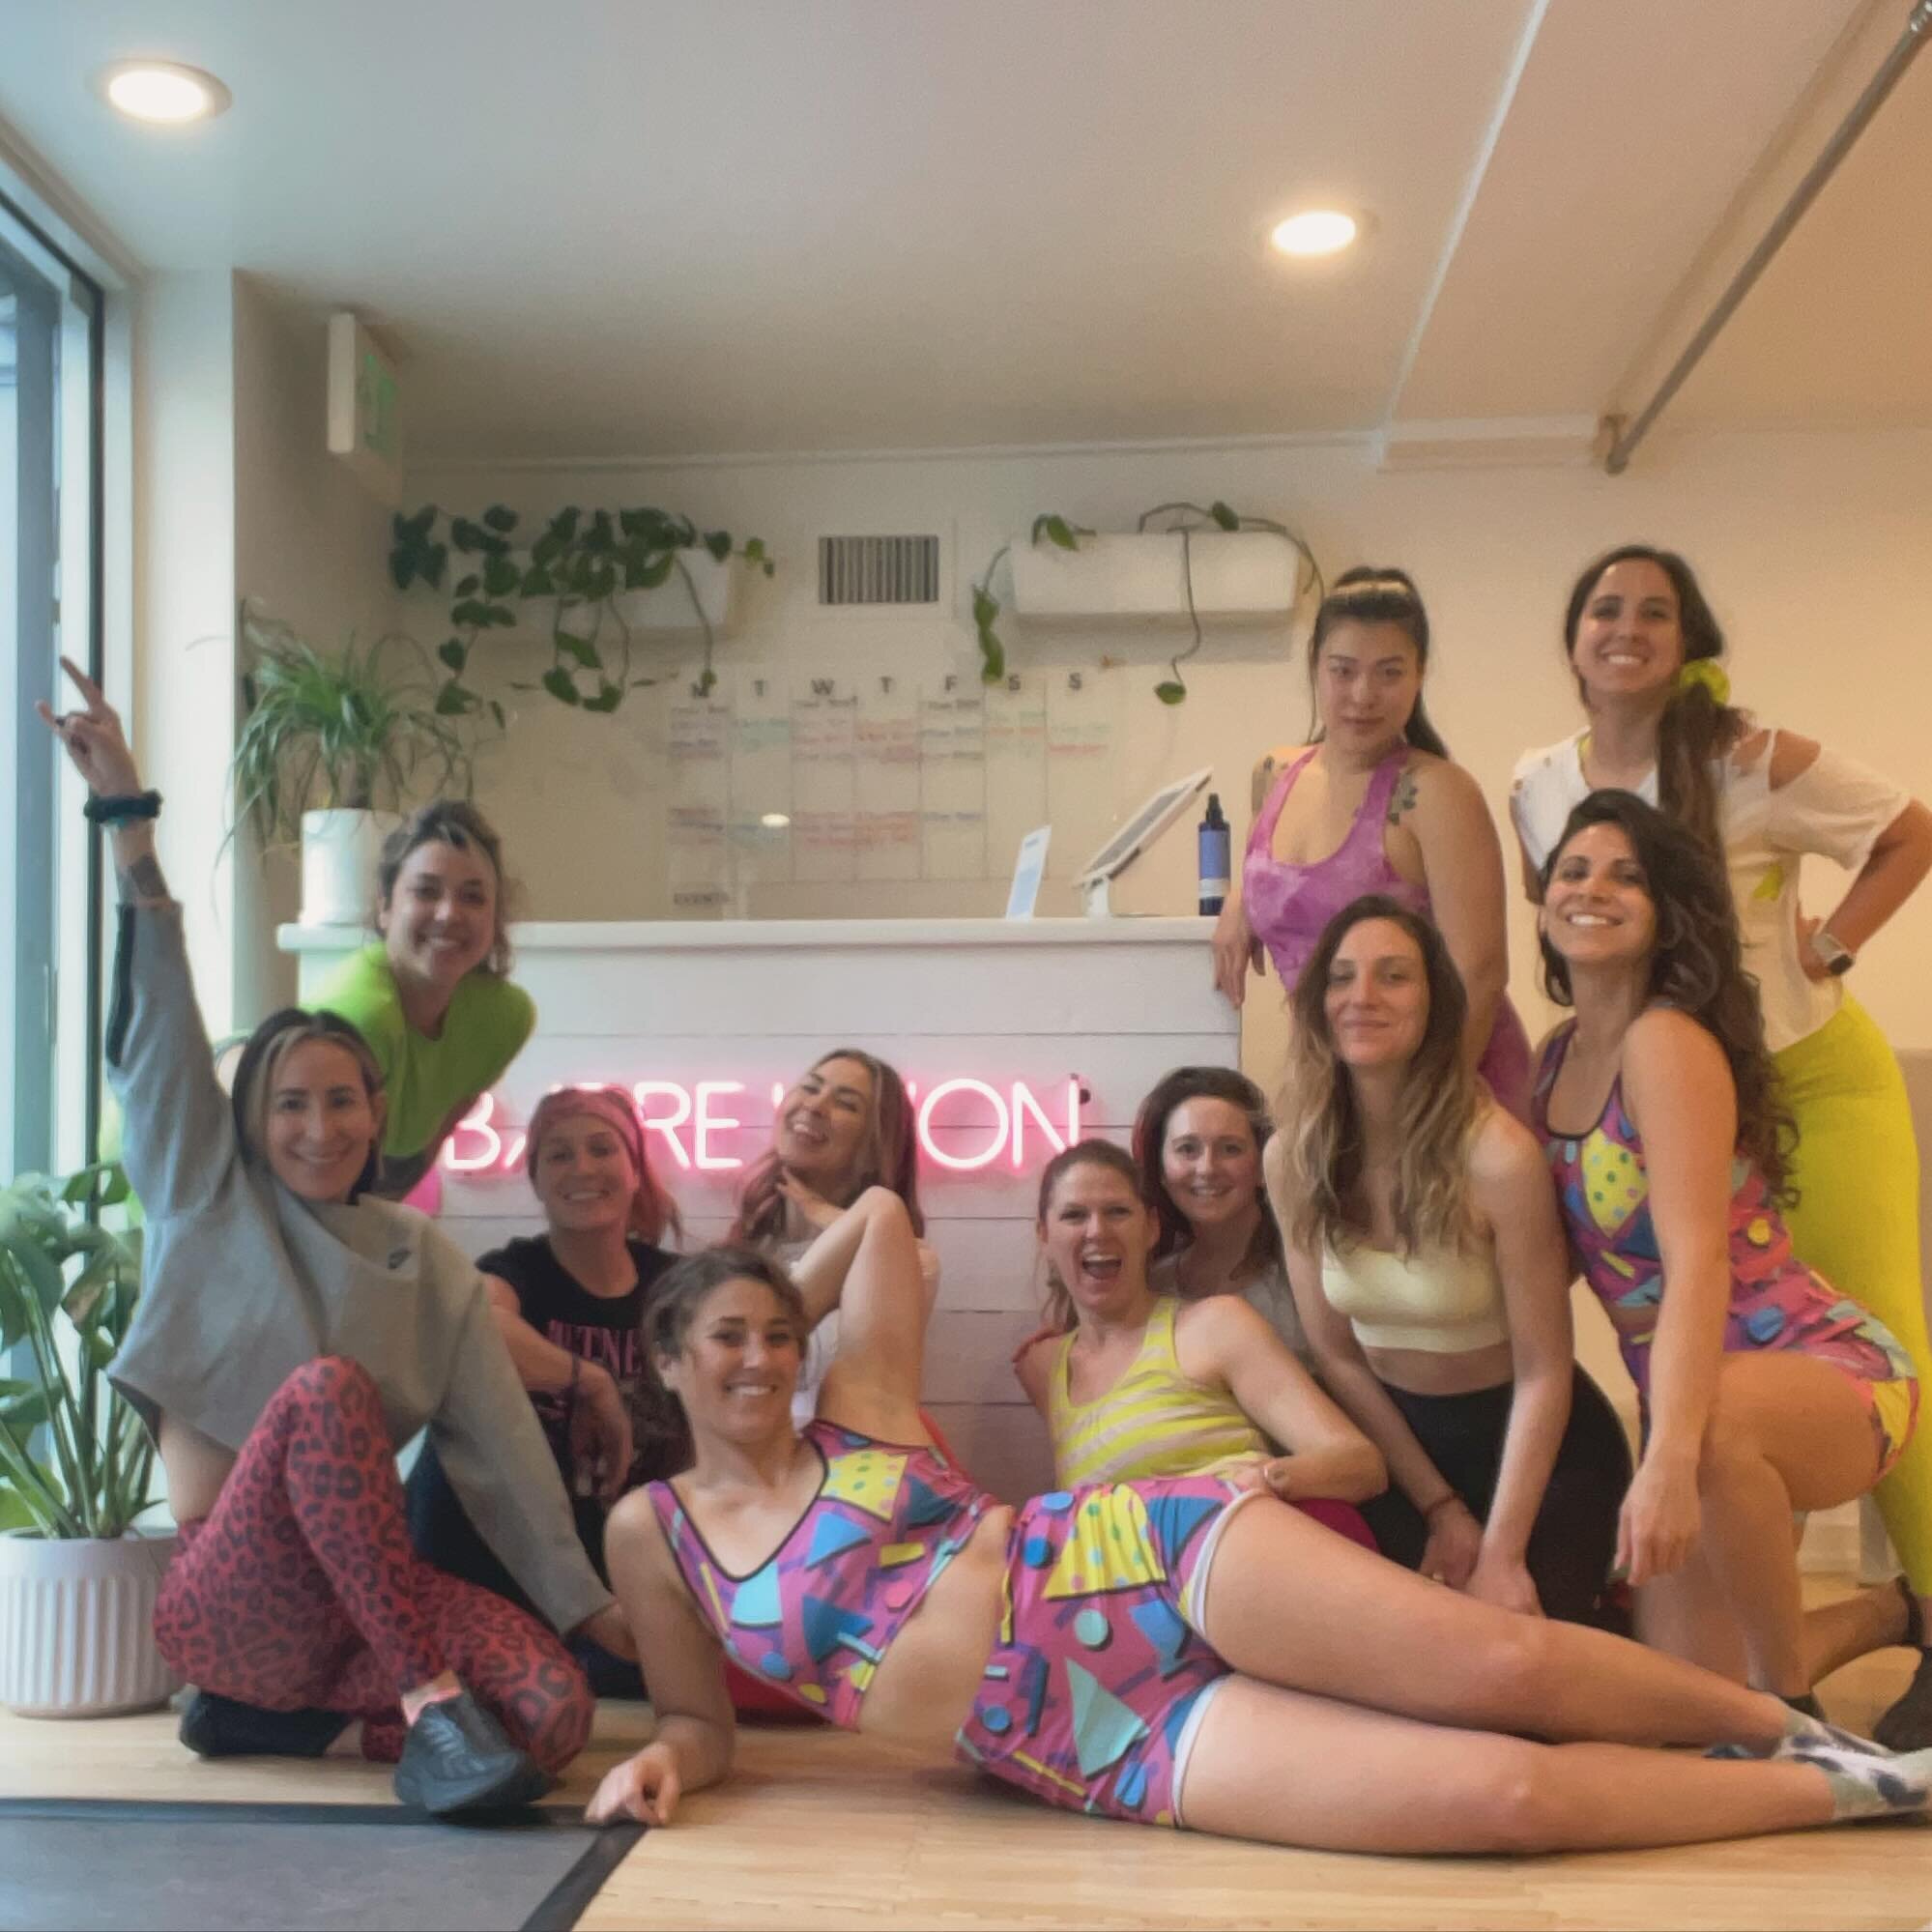 Galentines 💘 Day Celebration at the Barre!